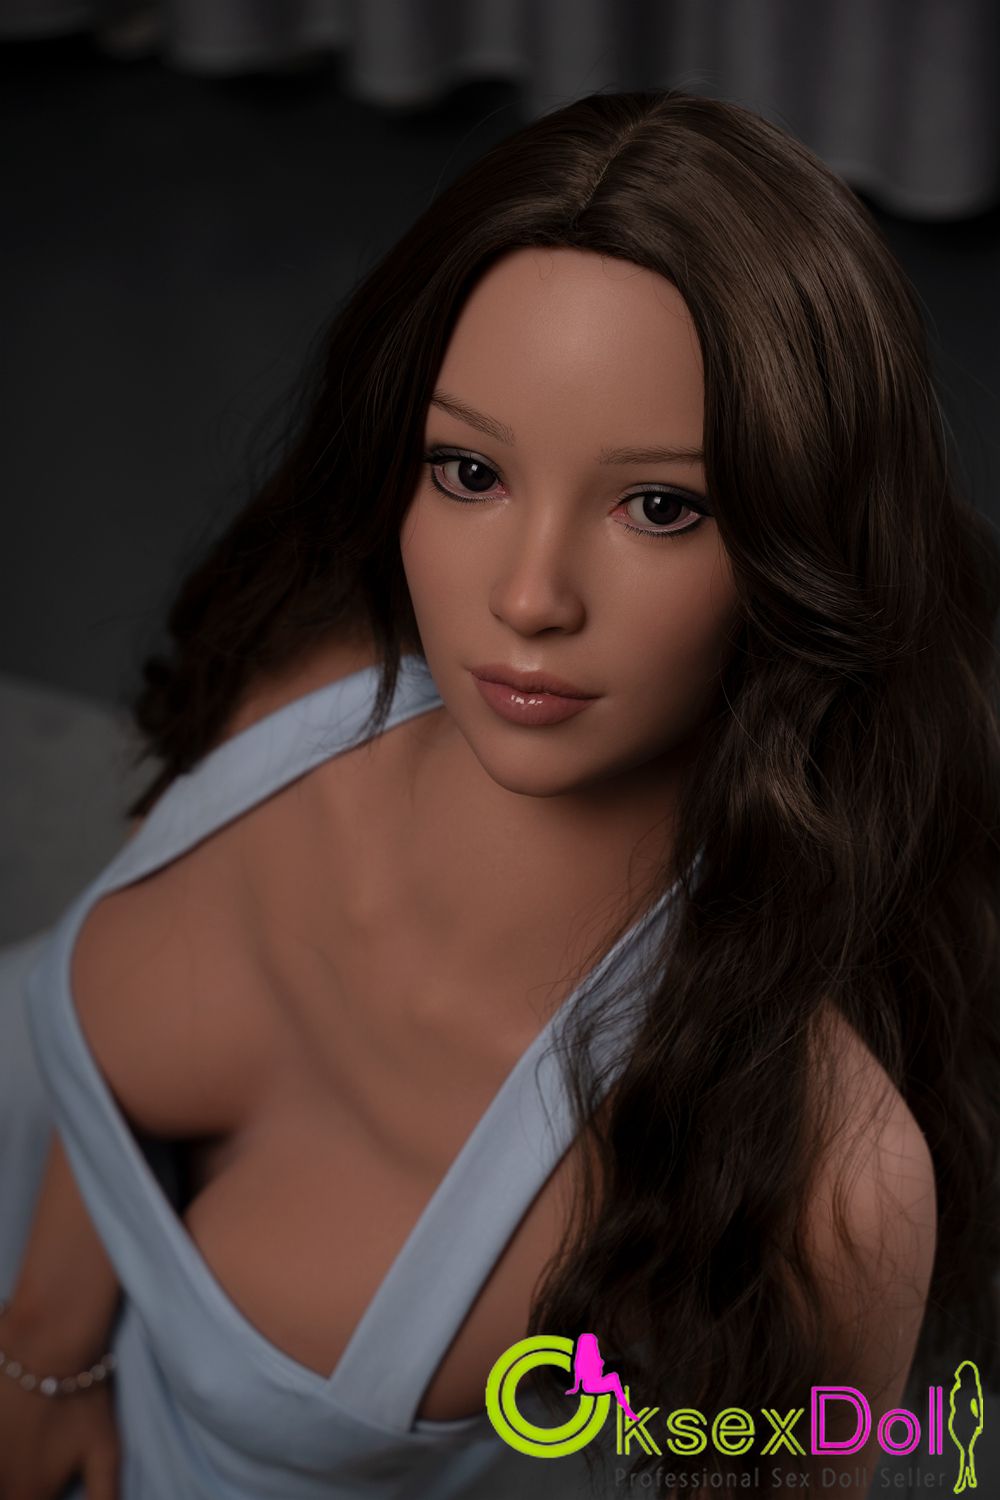 Marley Realistic Silicone Sex Doll Images